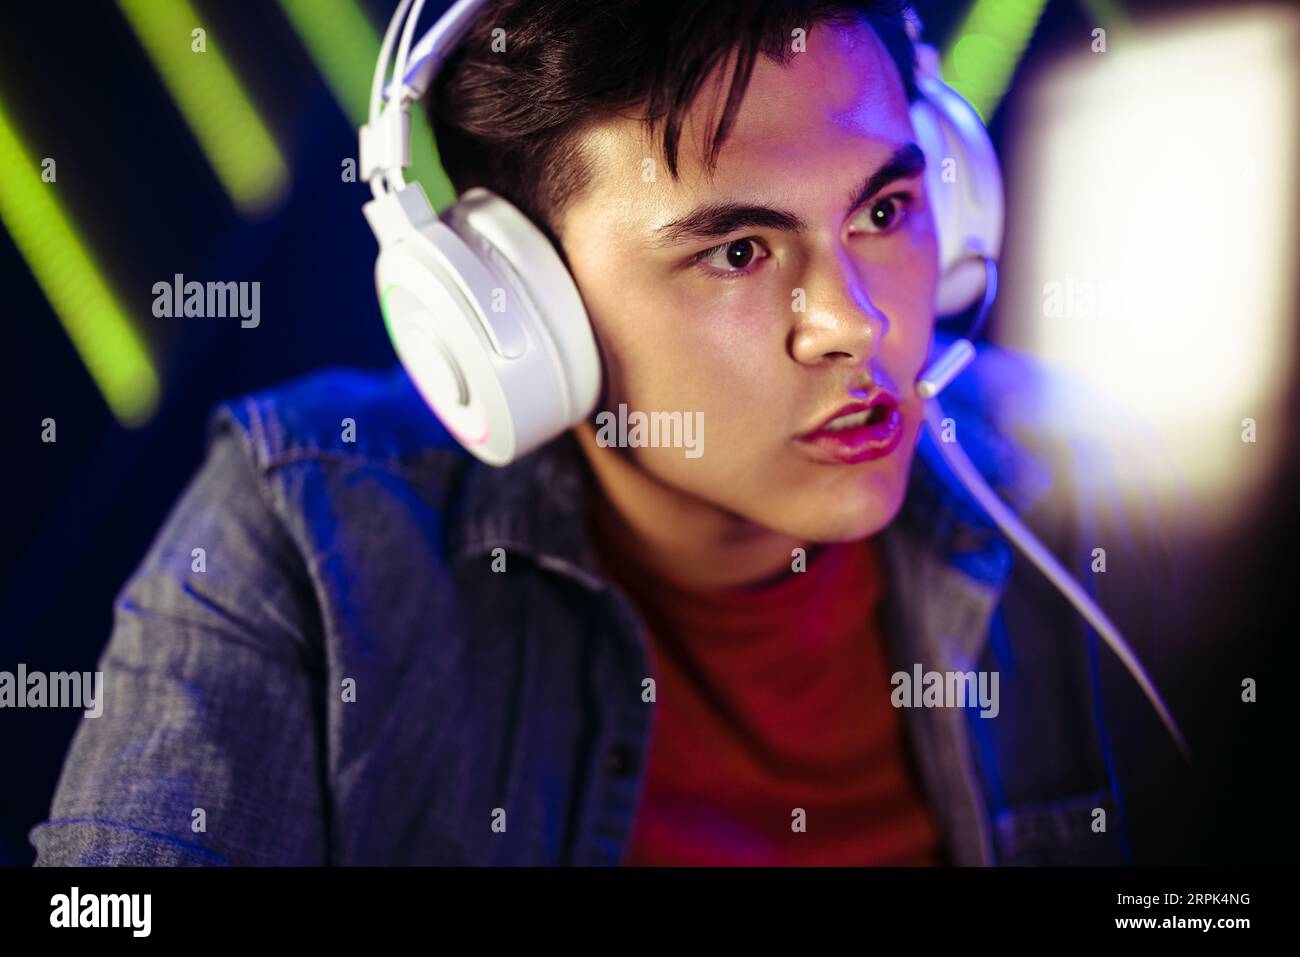 Young male gamer sitting with his eyes fixed on the computer screen in front of him. Wearing a headset, his expression is tense and his eyebrows are f Stock Photo